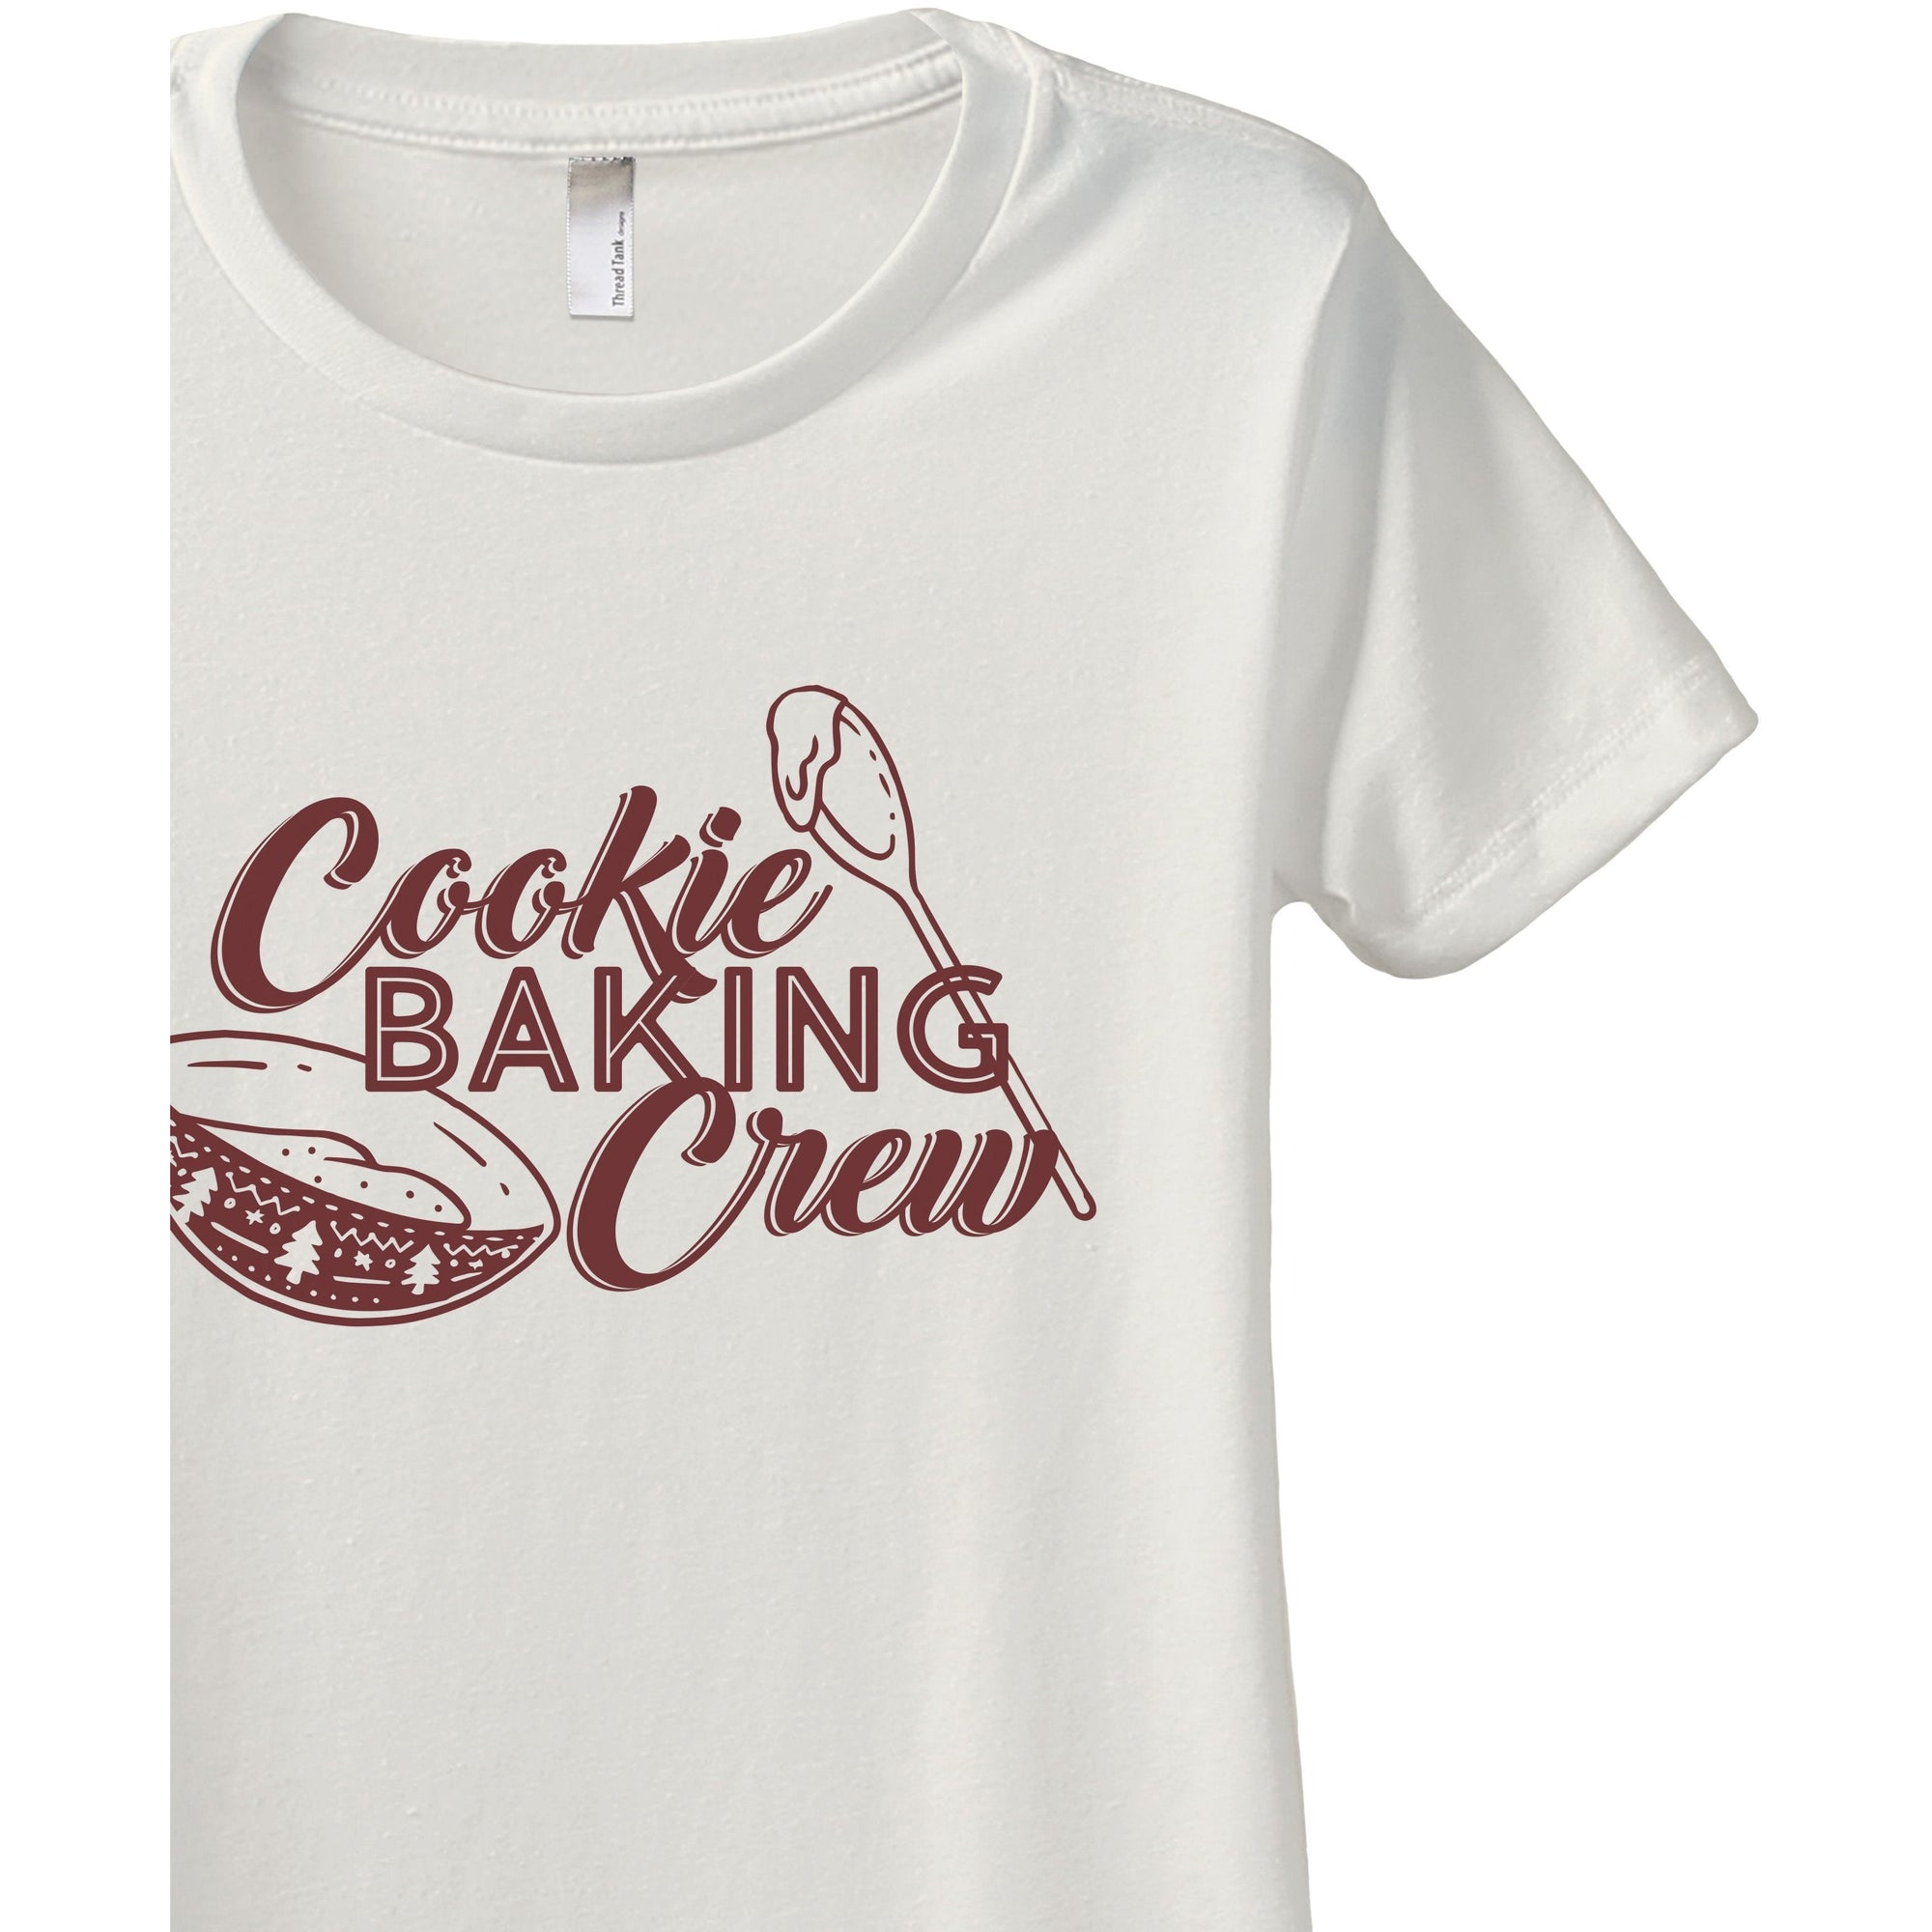 Cookie Baking Crew Women's Relaxed Crewneck T-Shirt Top Tee Vintage White Scarlet